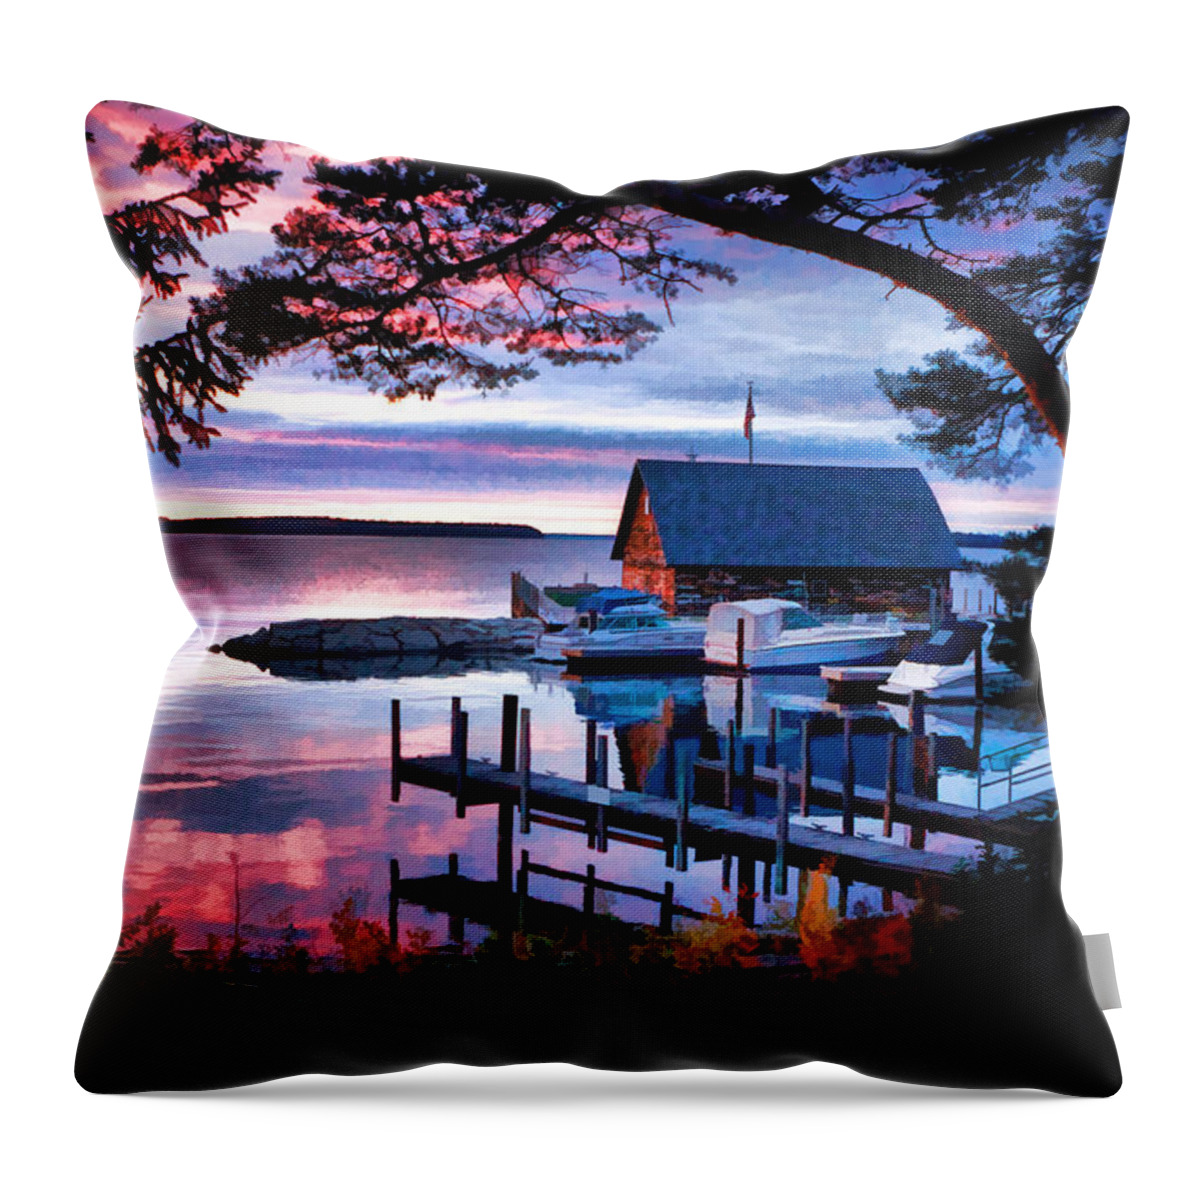 Anderson Dock Throw Pillow featuring the painting Door County Anderson Dock Sunset by Christopher Arndt